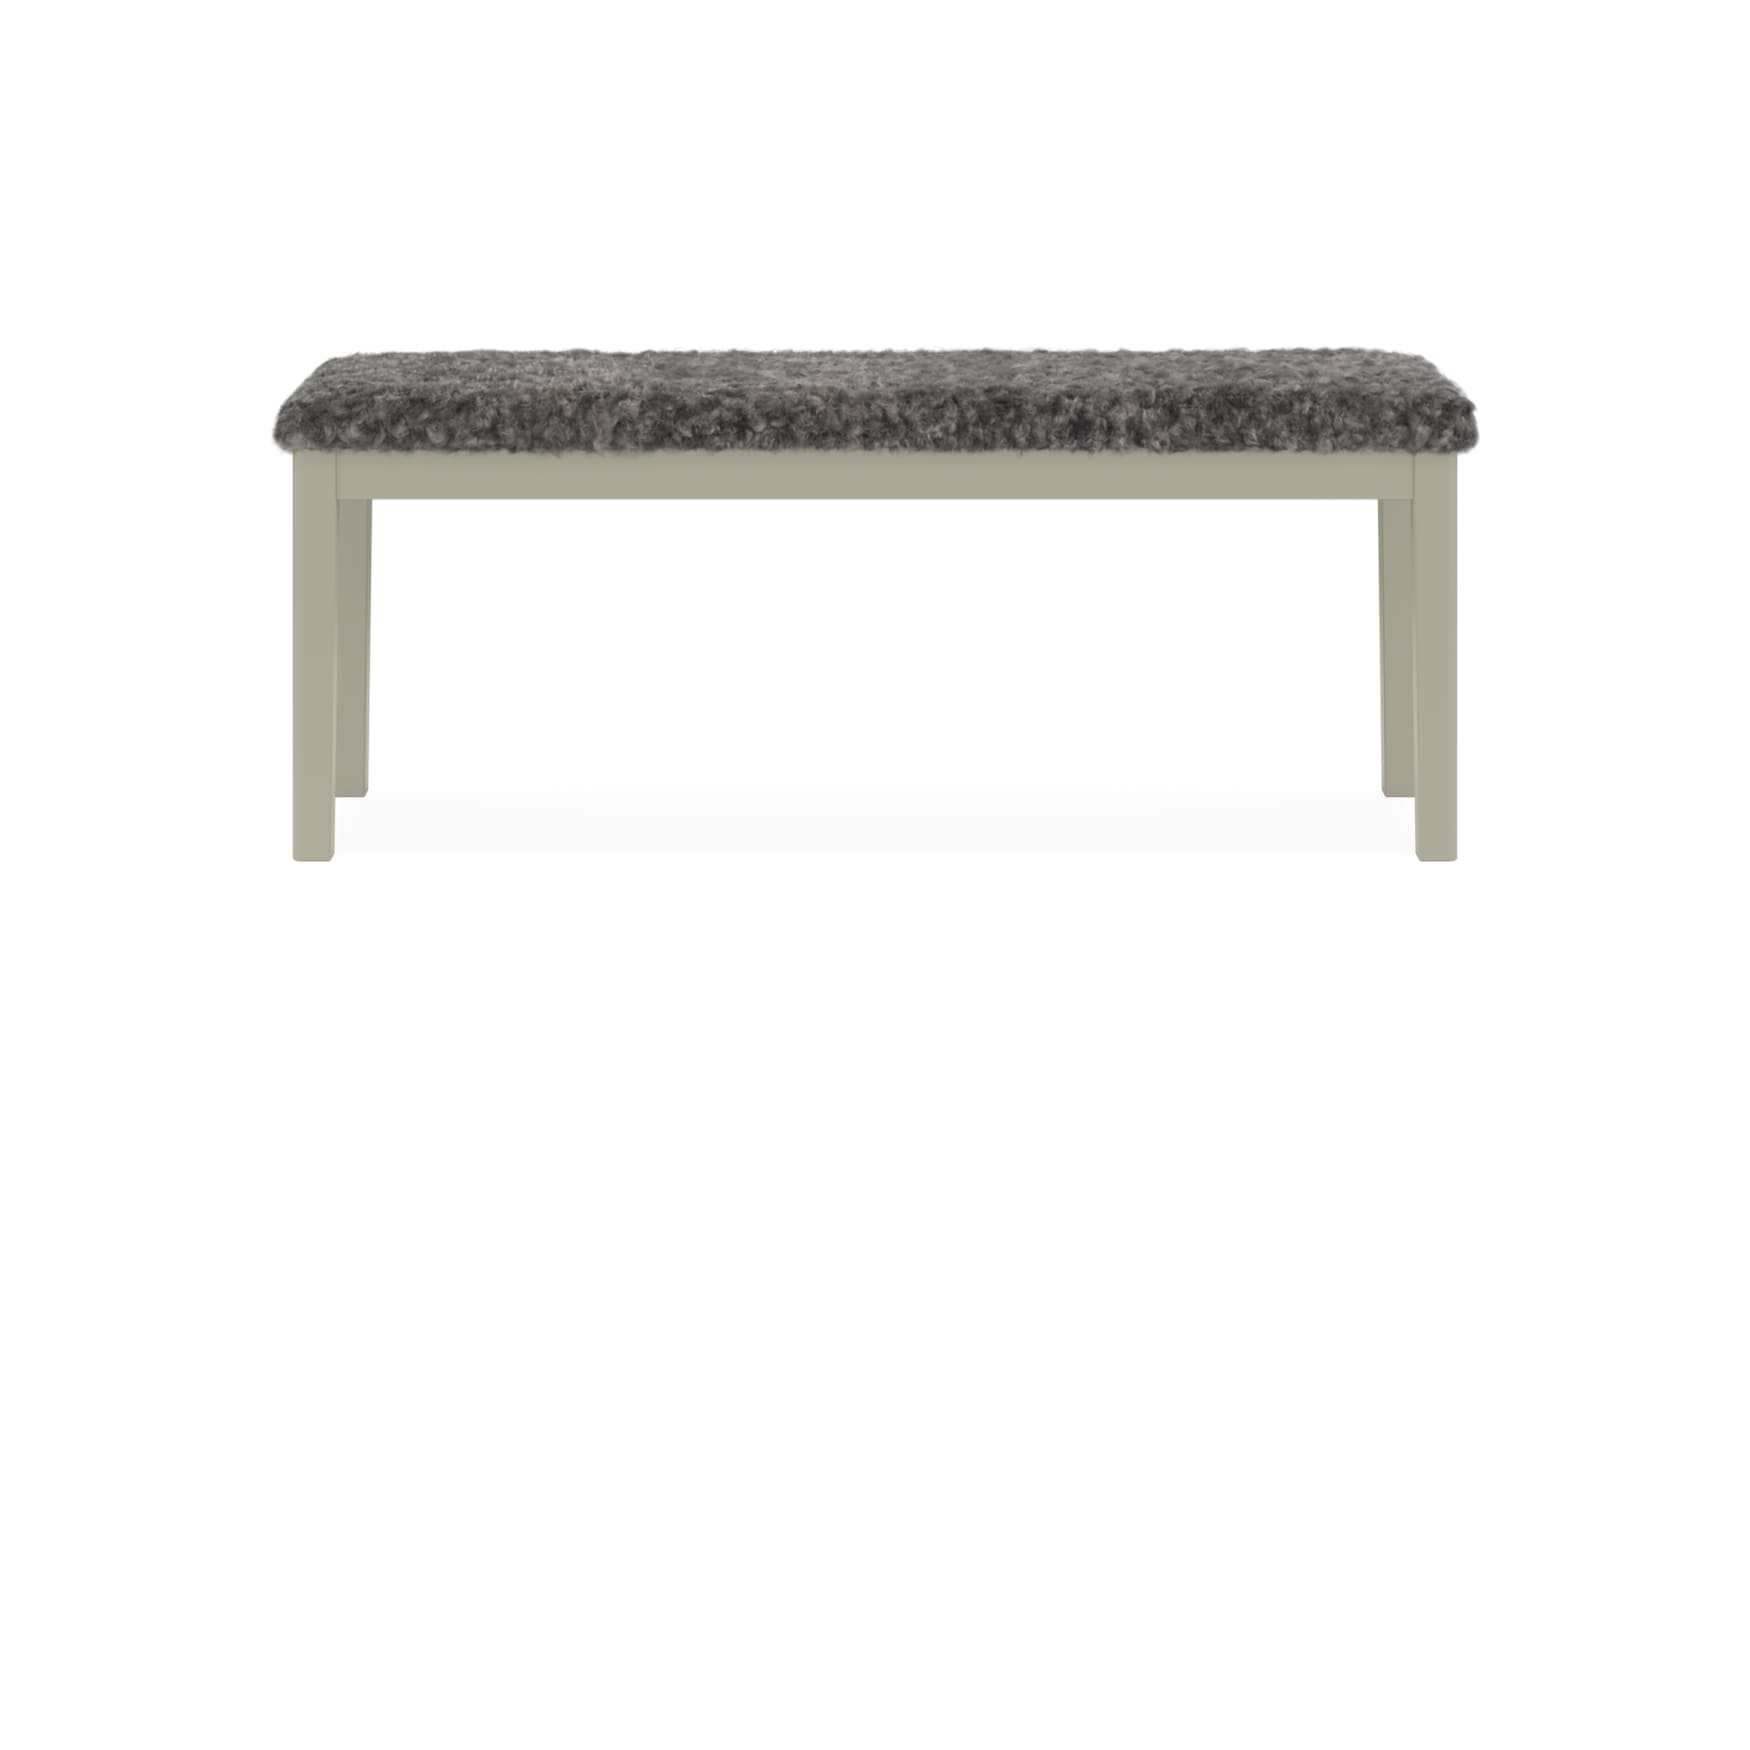 Multi-O bench with upholstered seat